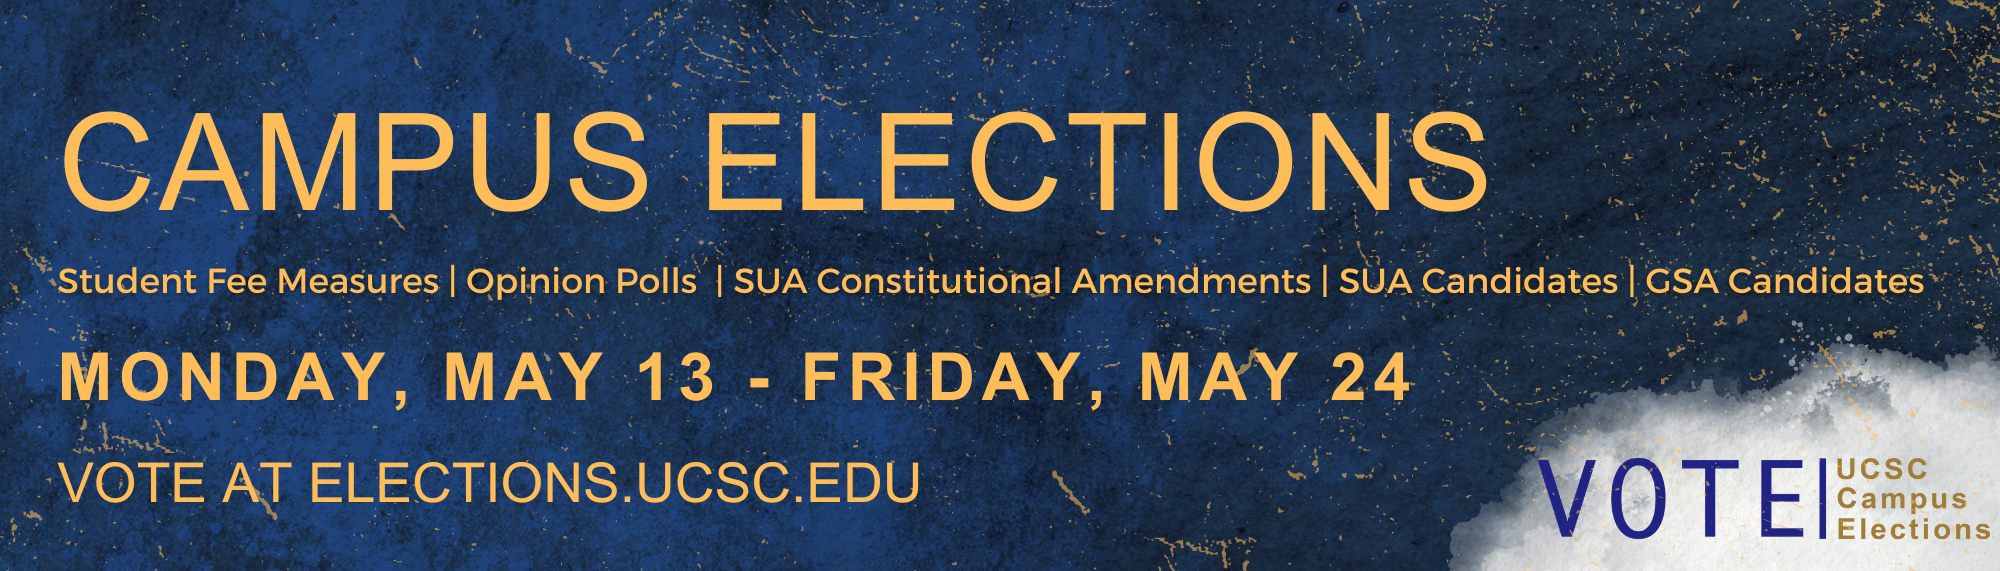 ucsc-campus-elections-website-banner.png